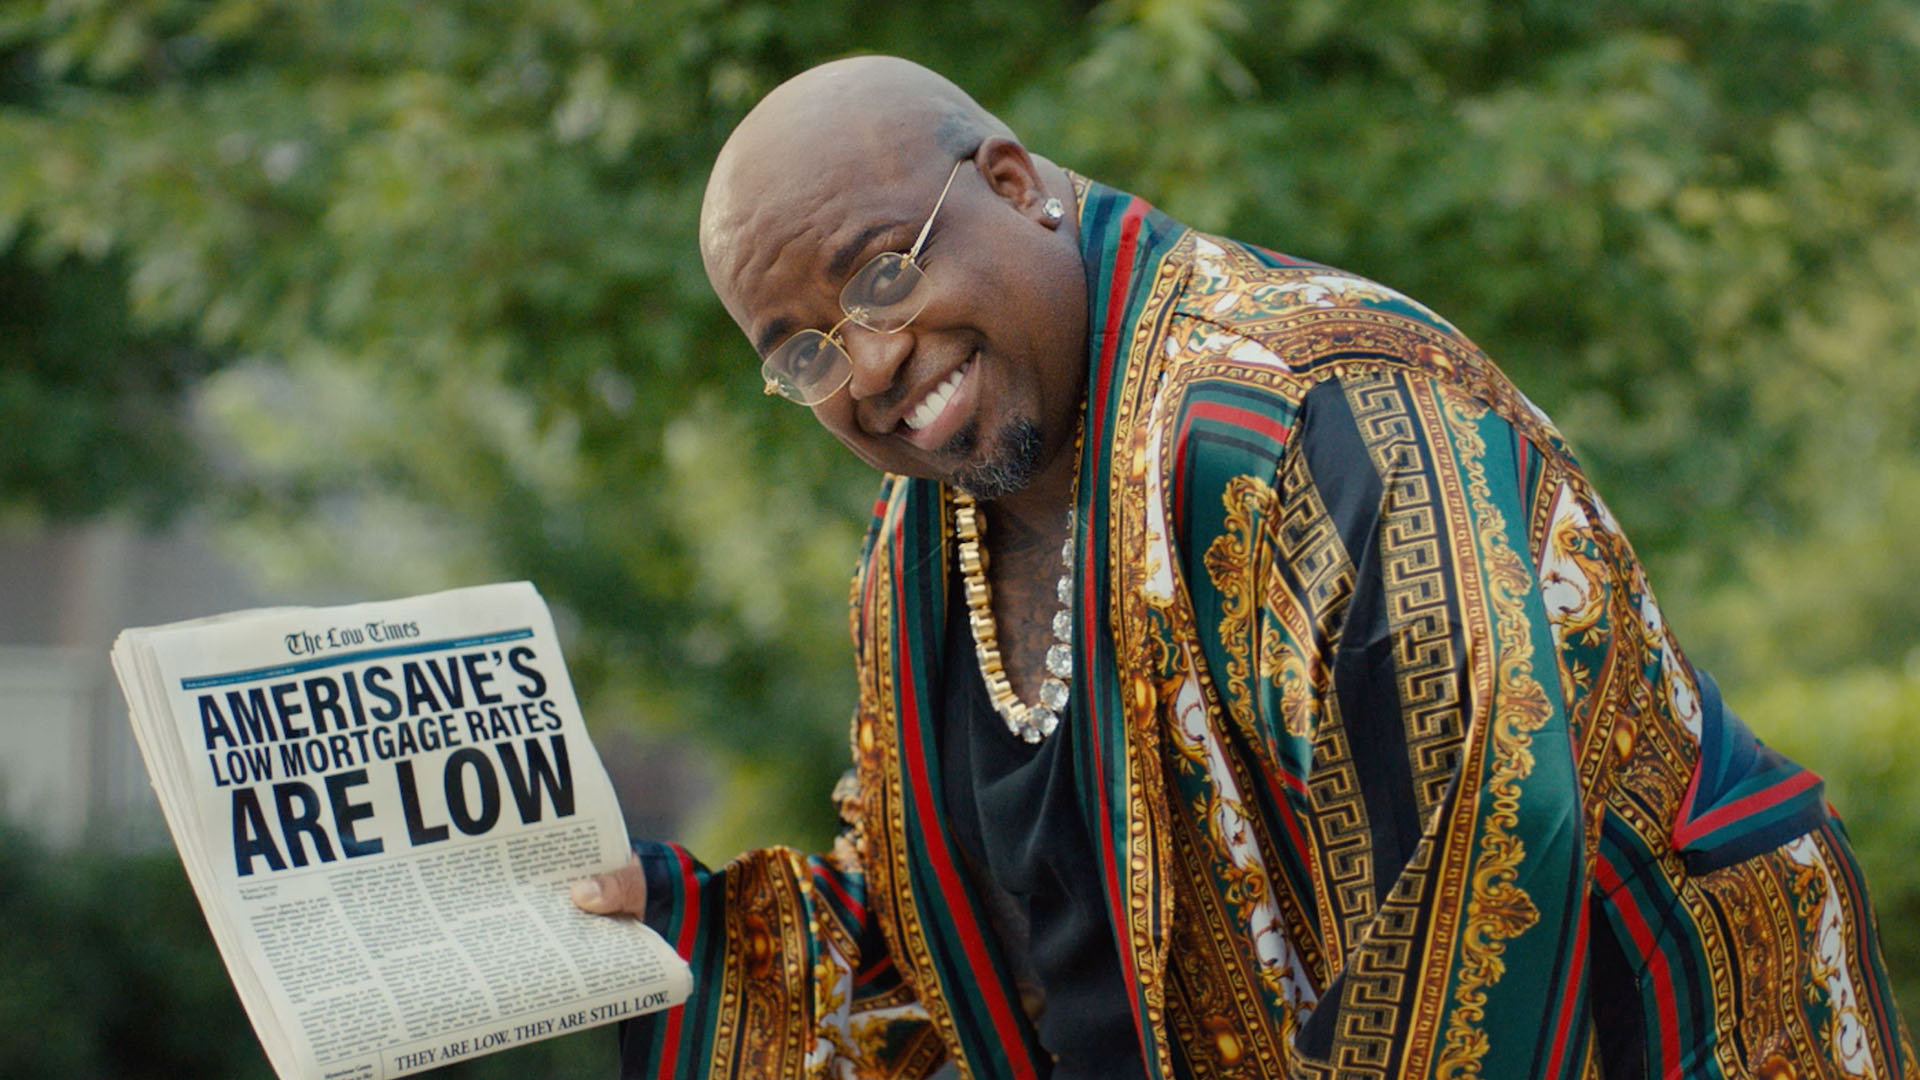  CeeLo Green gives the down low on AmeriSave